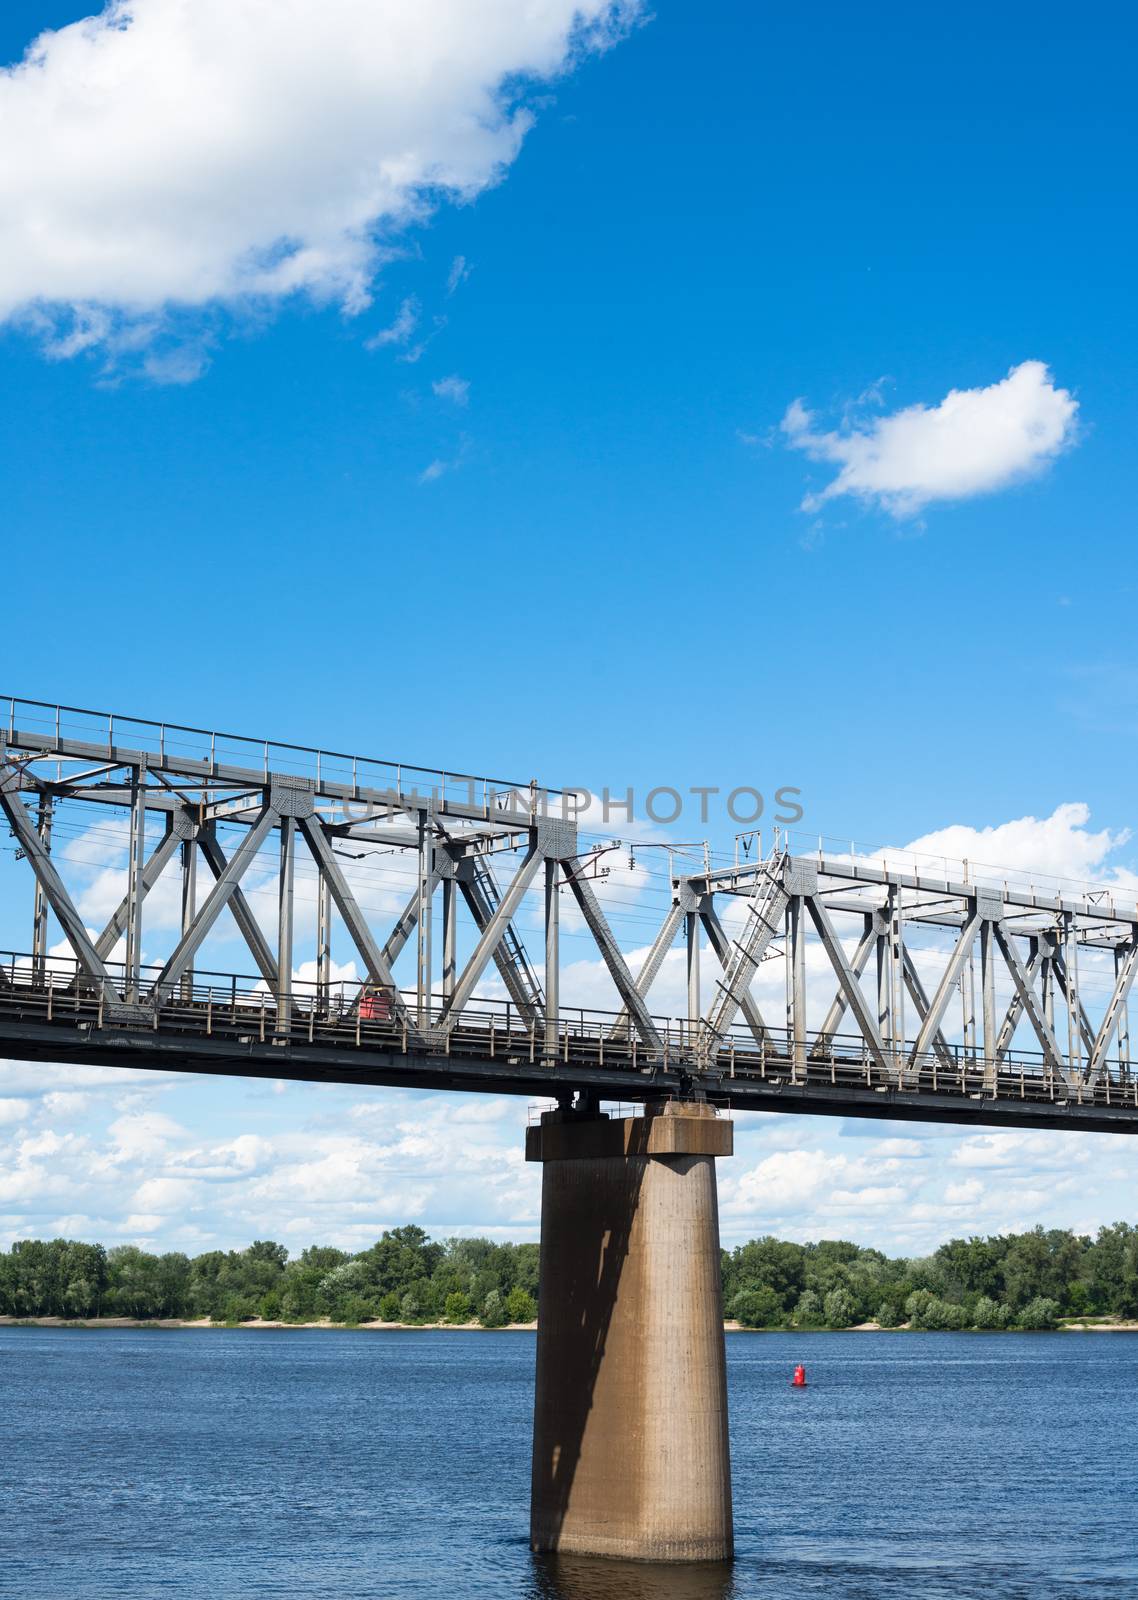 One of the piers supporting the railroad bridge across the Dnieper in Kyiv